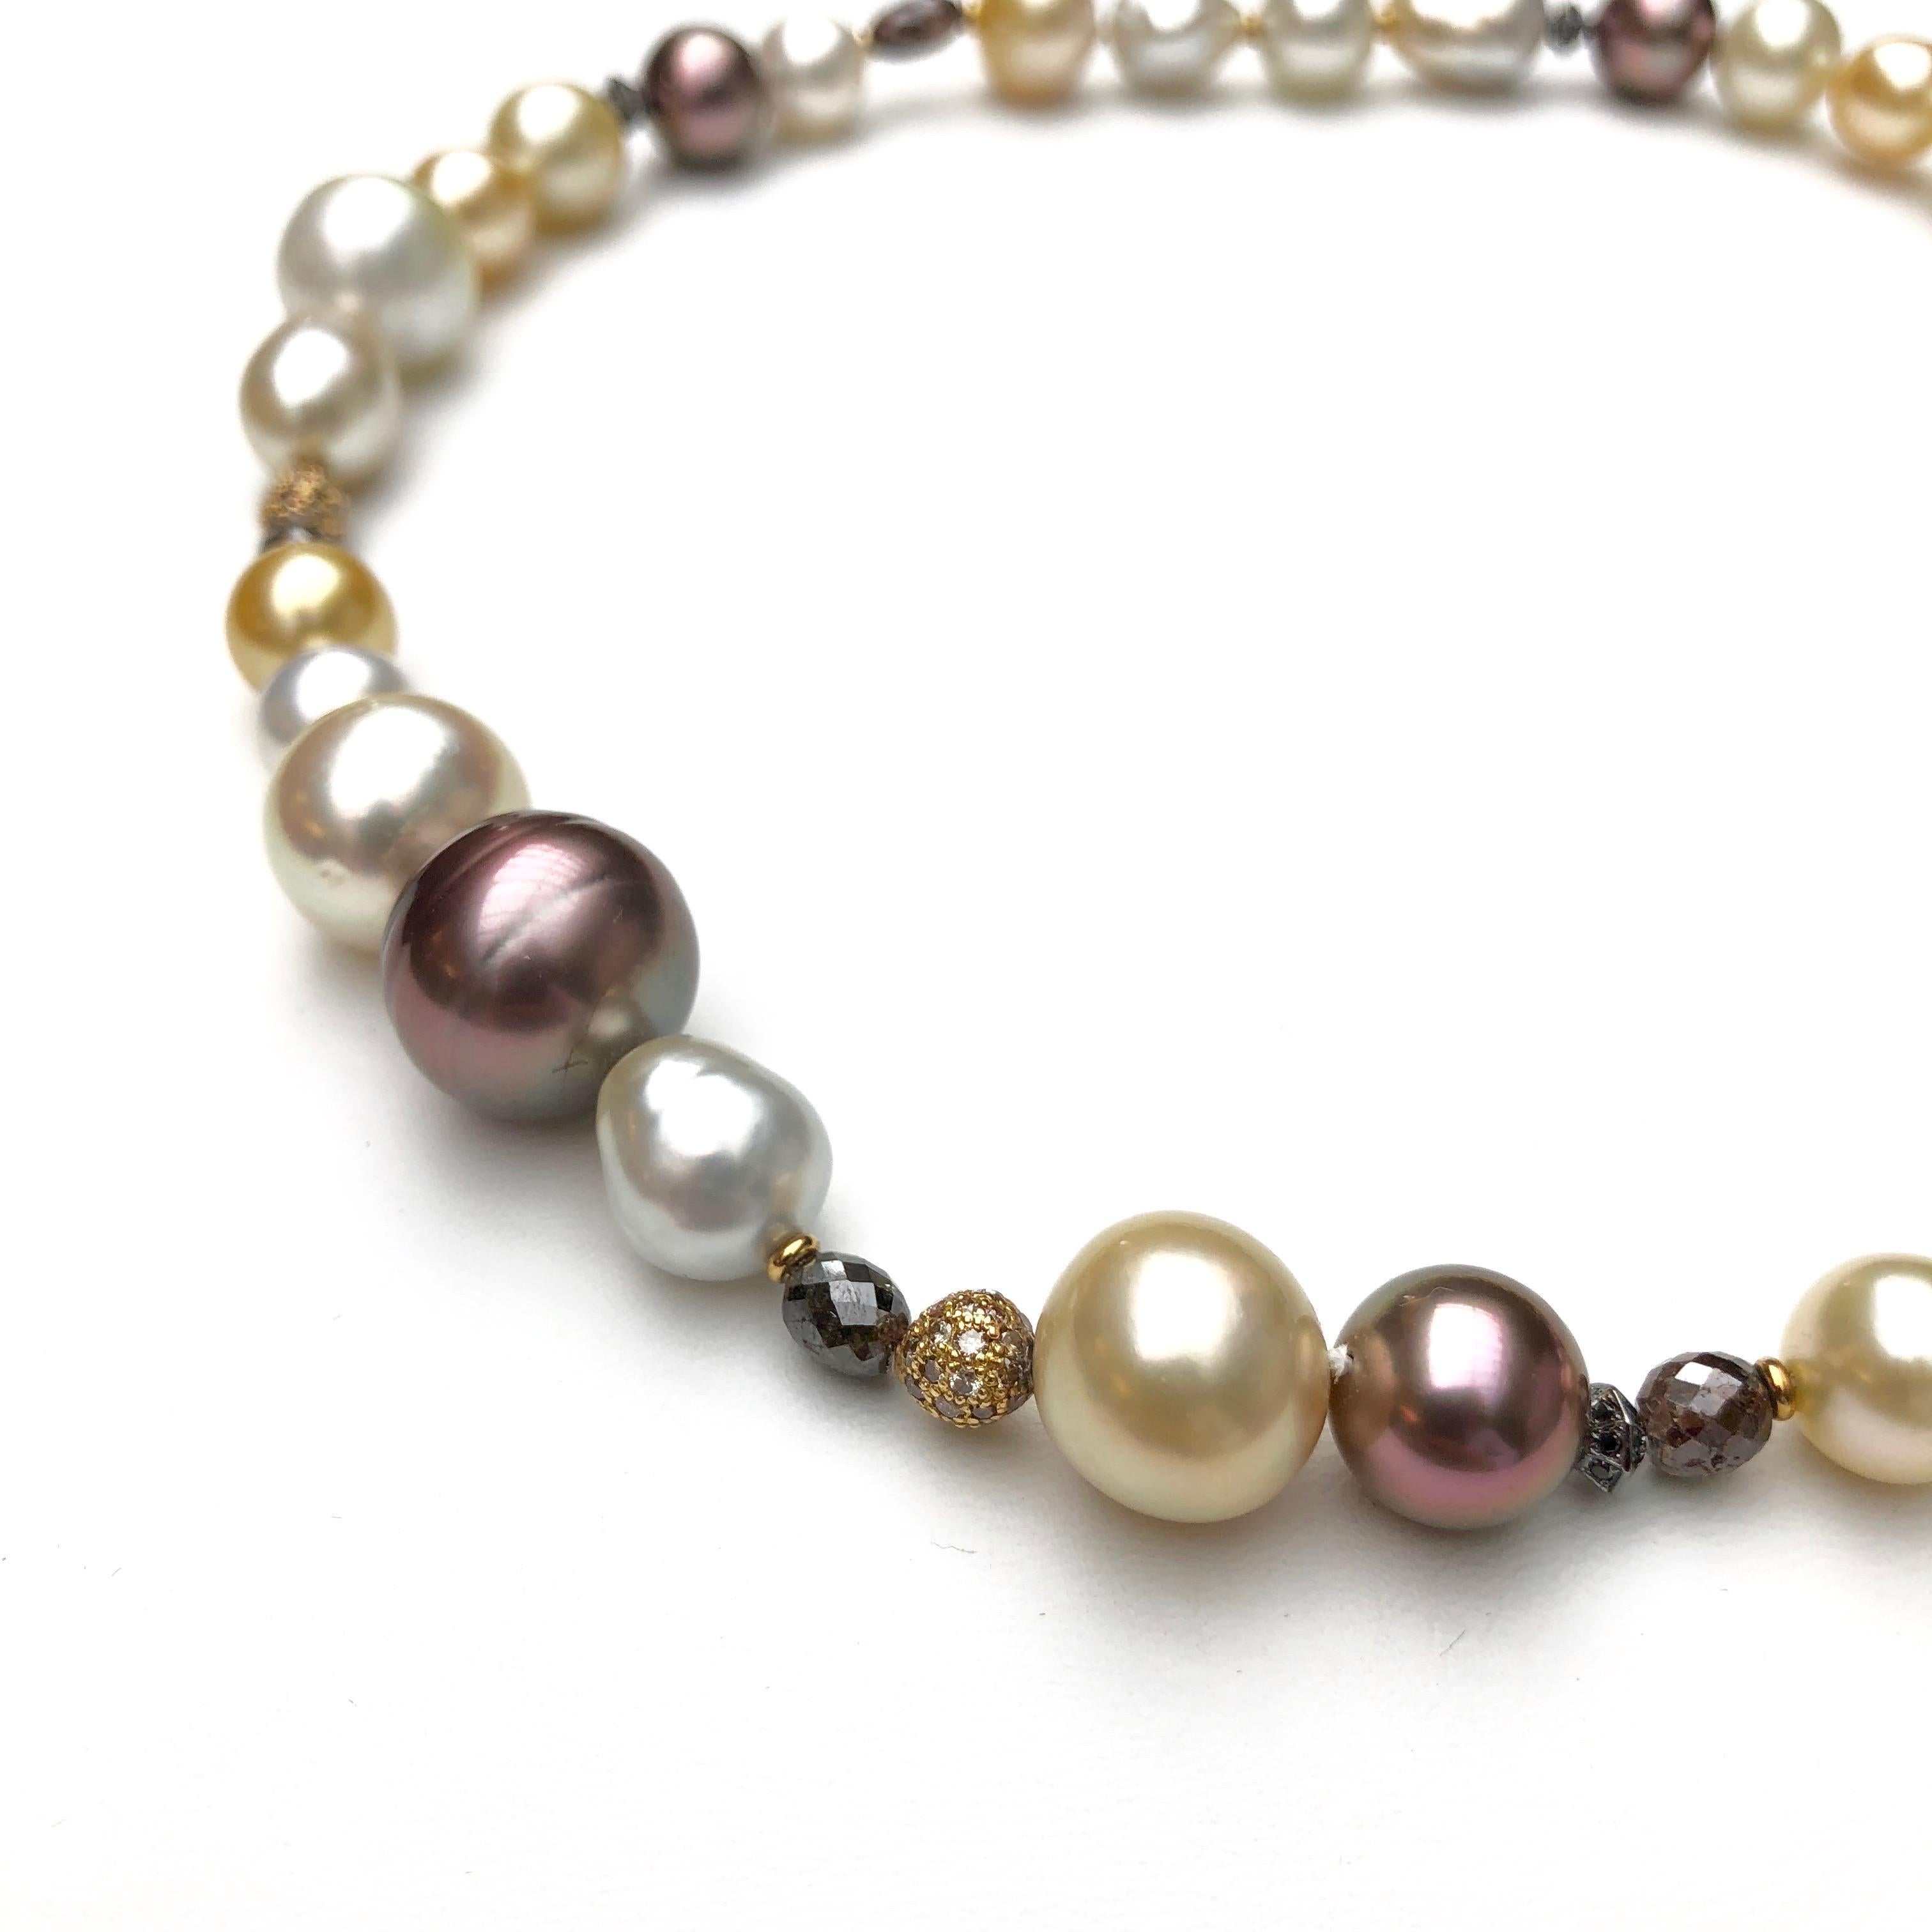 What an warm, rich and bright color combination.
25 different South Sea Cultured Pearls plus 6 brown Tahitian Cultured Pearls
18 ct. of burgundy colored , fine facetted diamonds
plus 42 tiny black heated diamonds and 136 brown diamonds. 
A beautiful